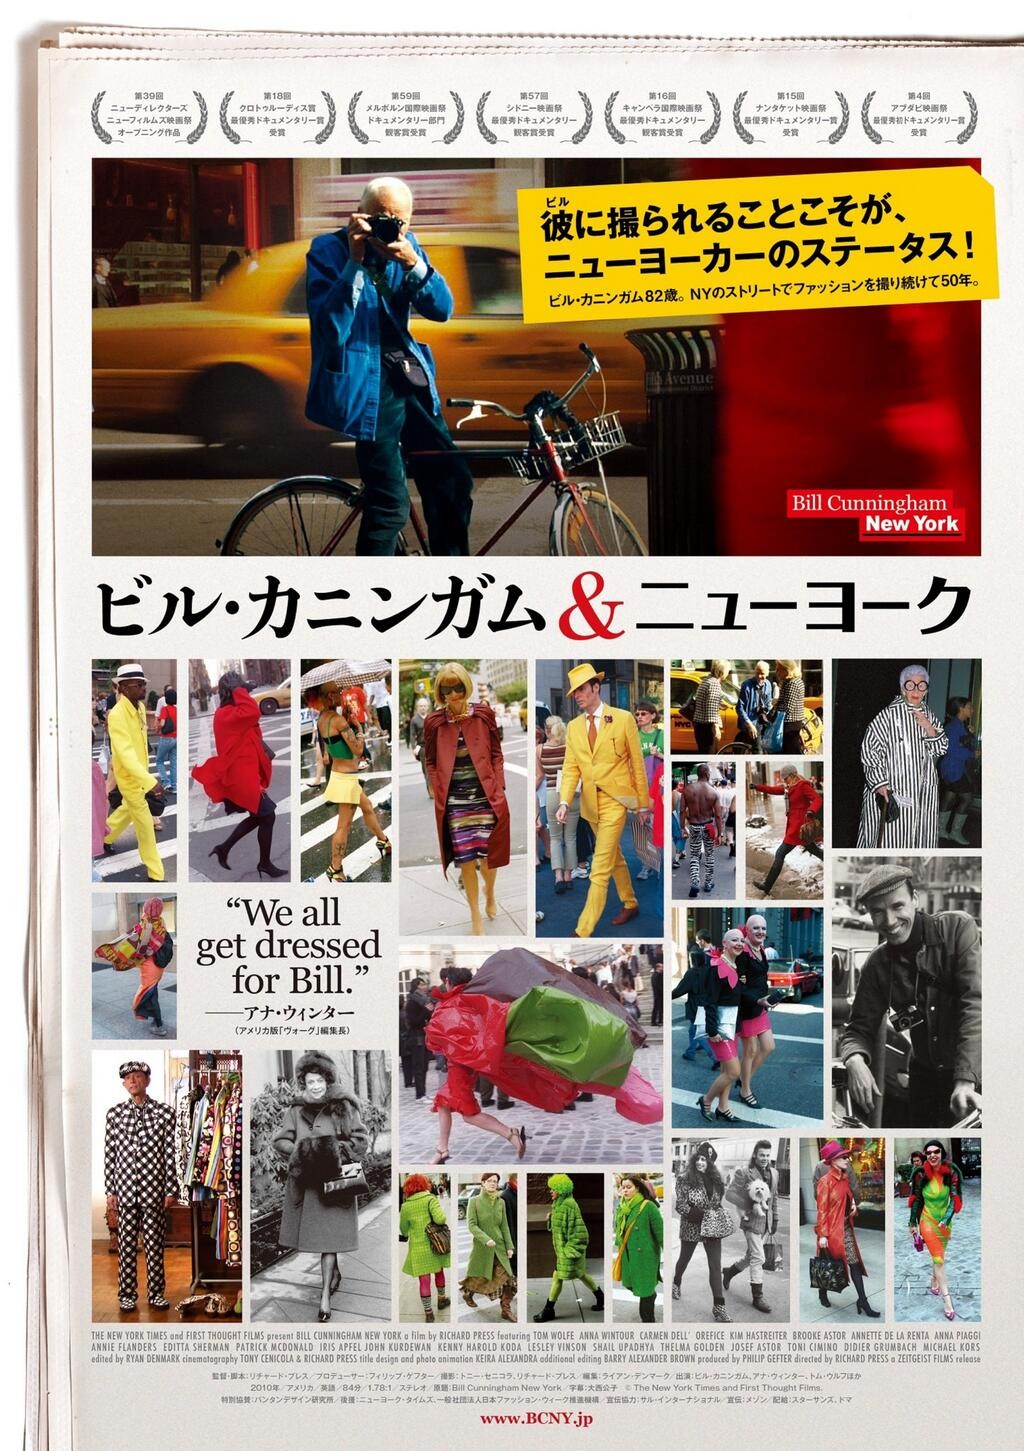 Extra Large Movie Poster Image for Bill Cunningham New York (#2 of 2)